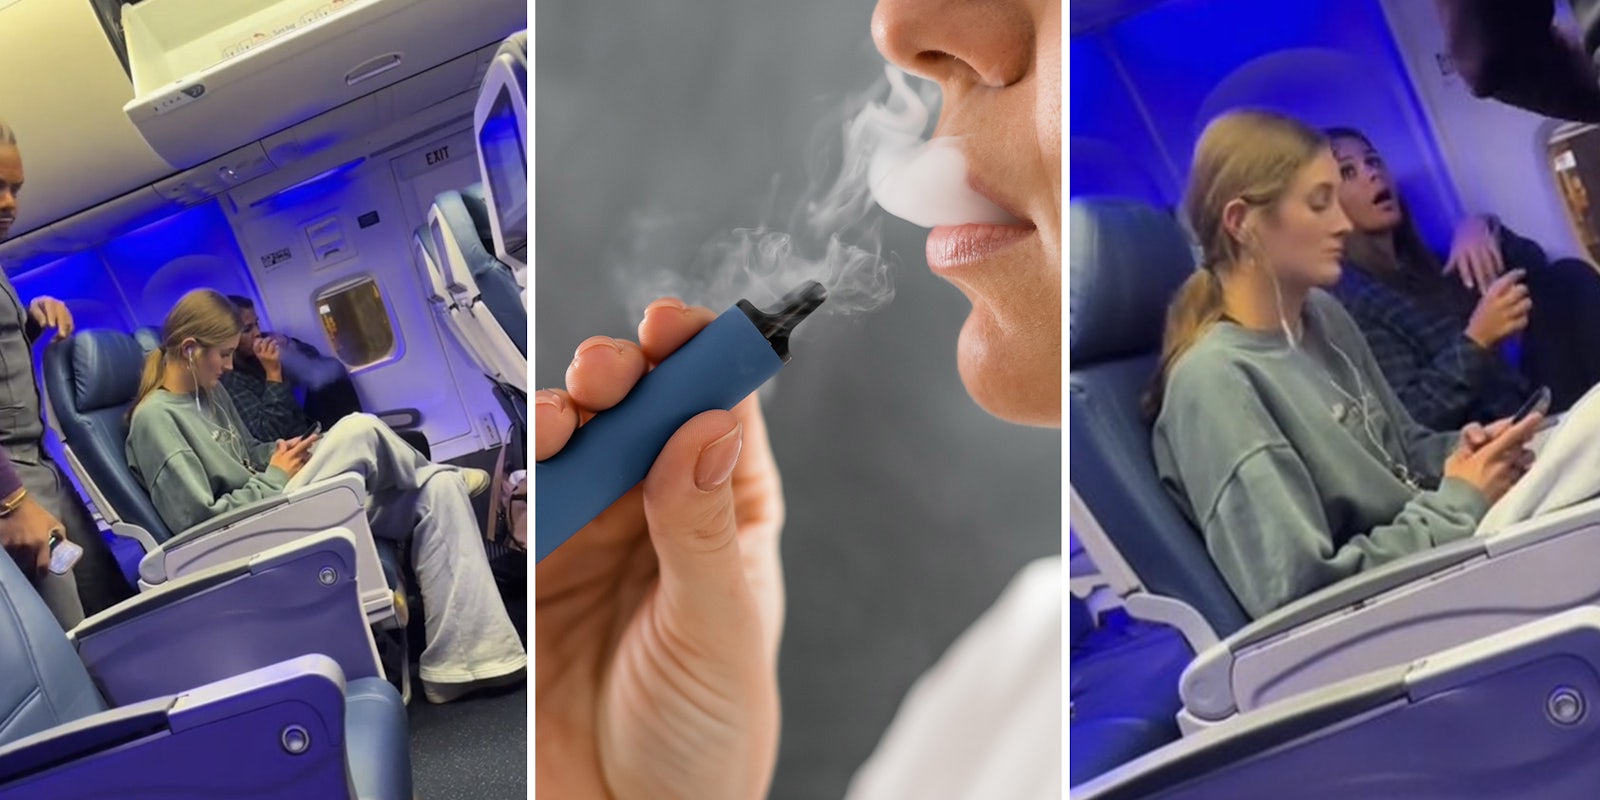 Woman gets caught vaping on plane, says she didn’t mean to